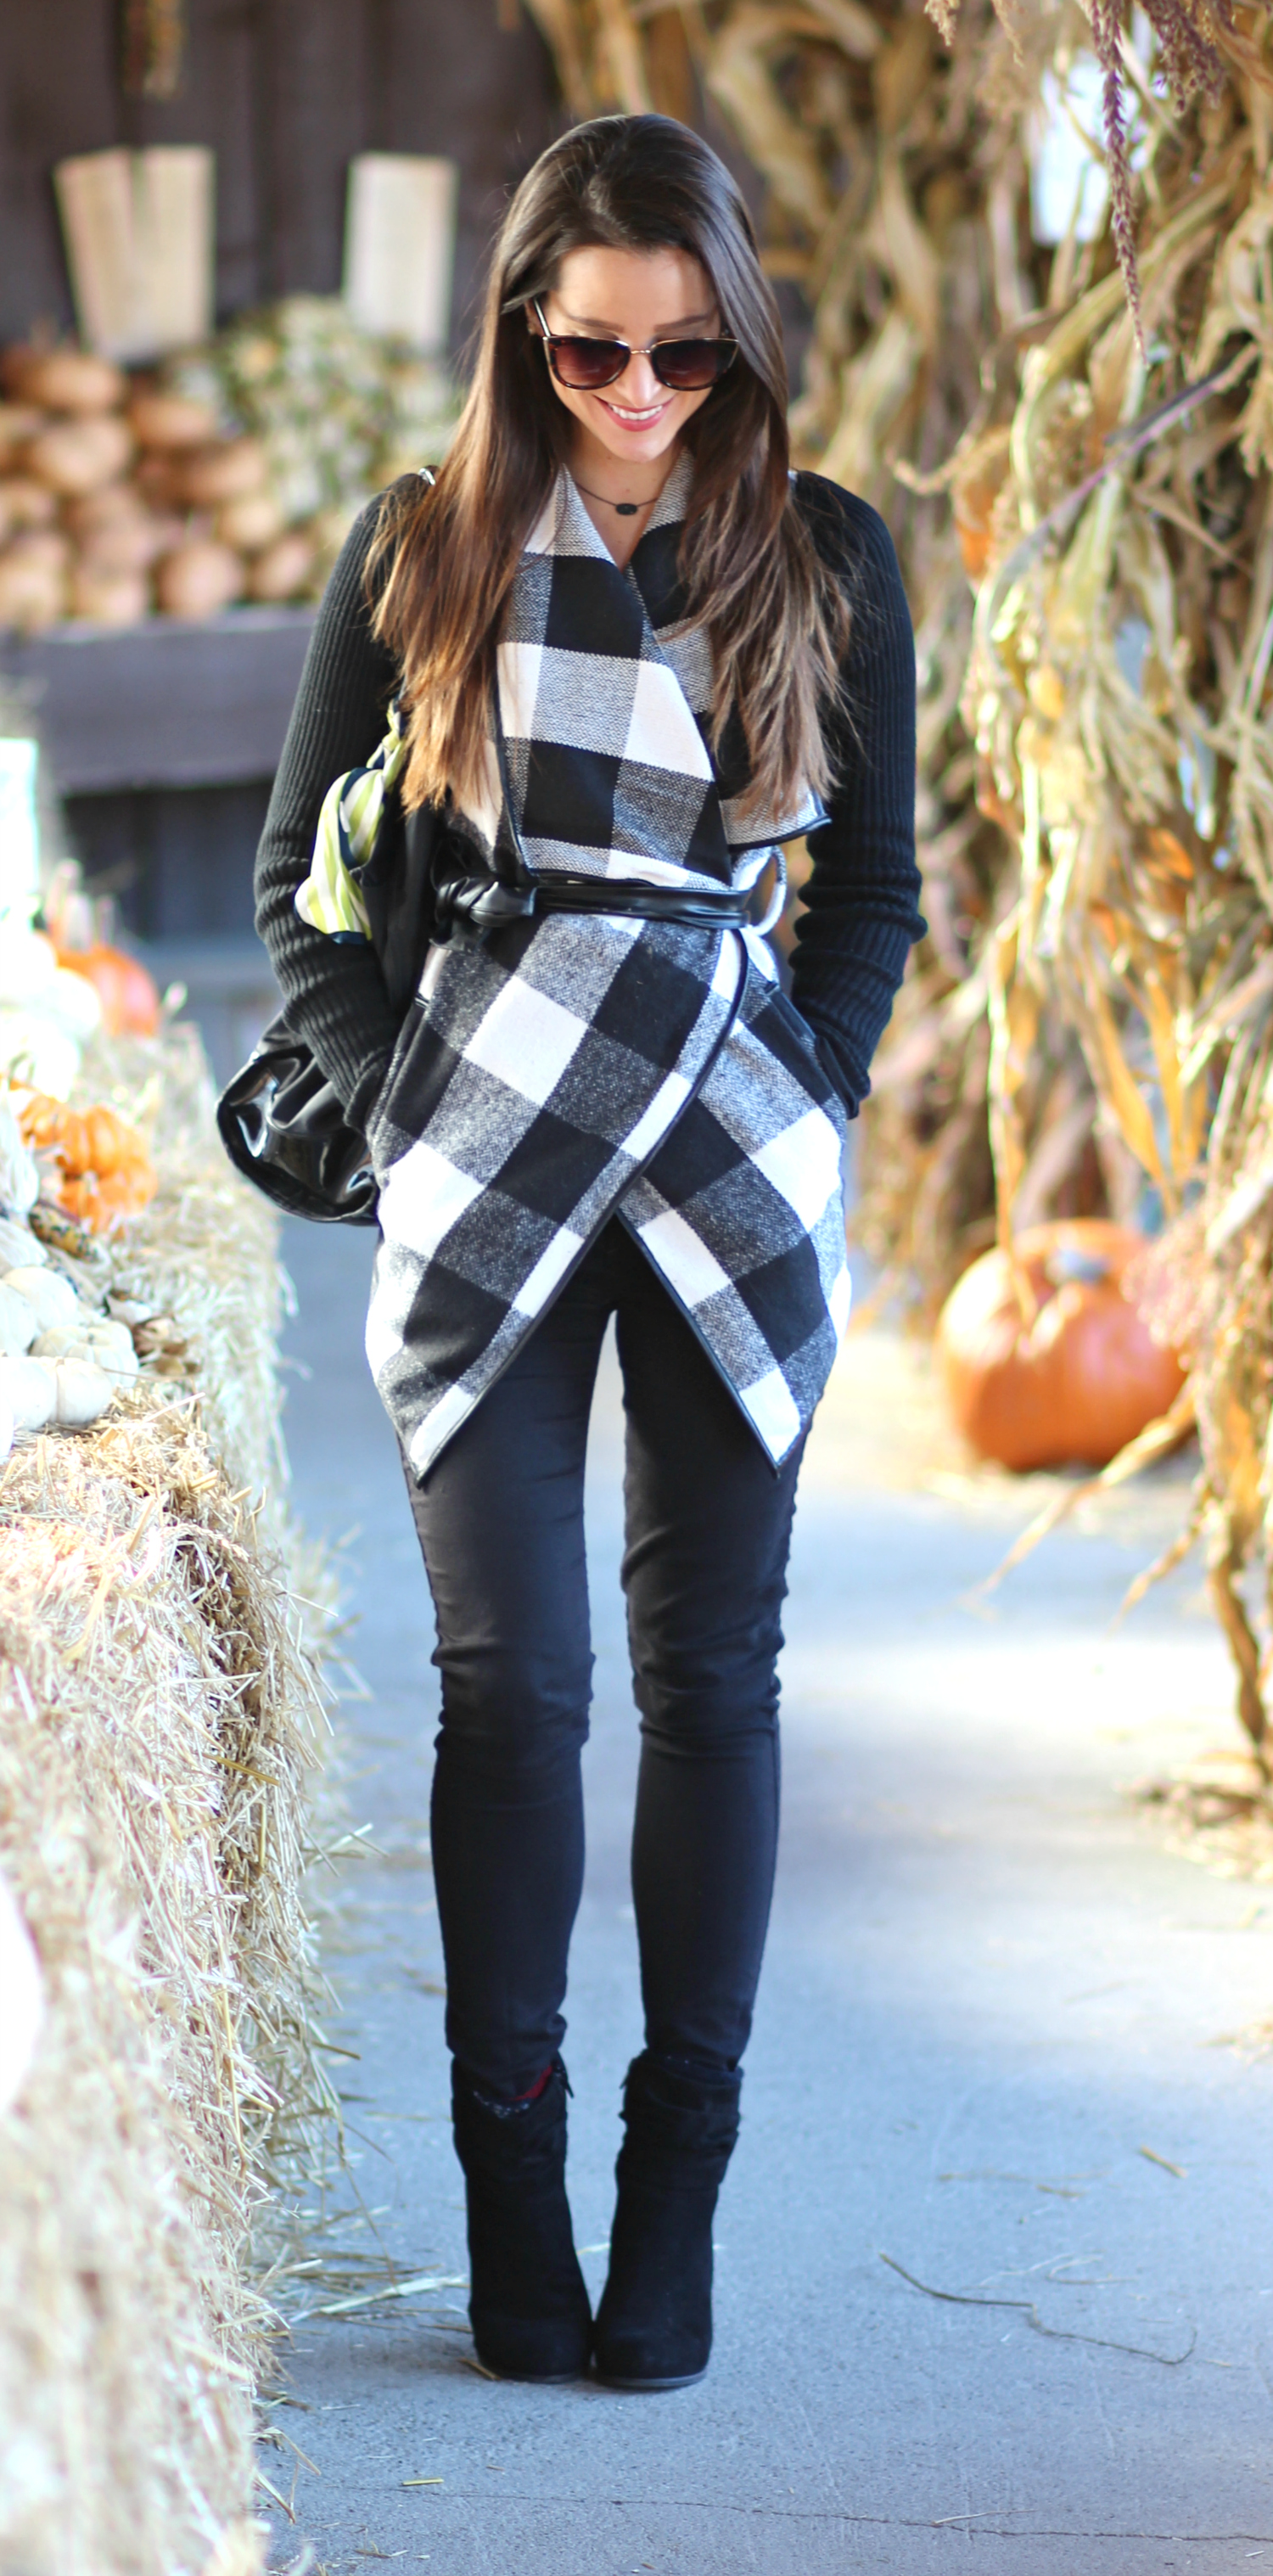 Affordable black and white plaid wrap coat from SheIn